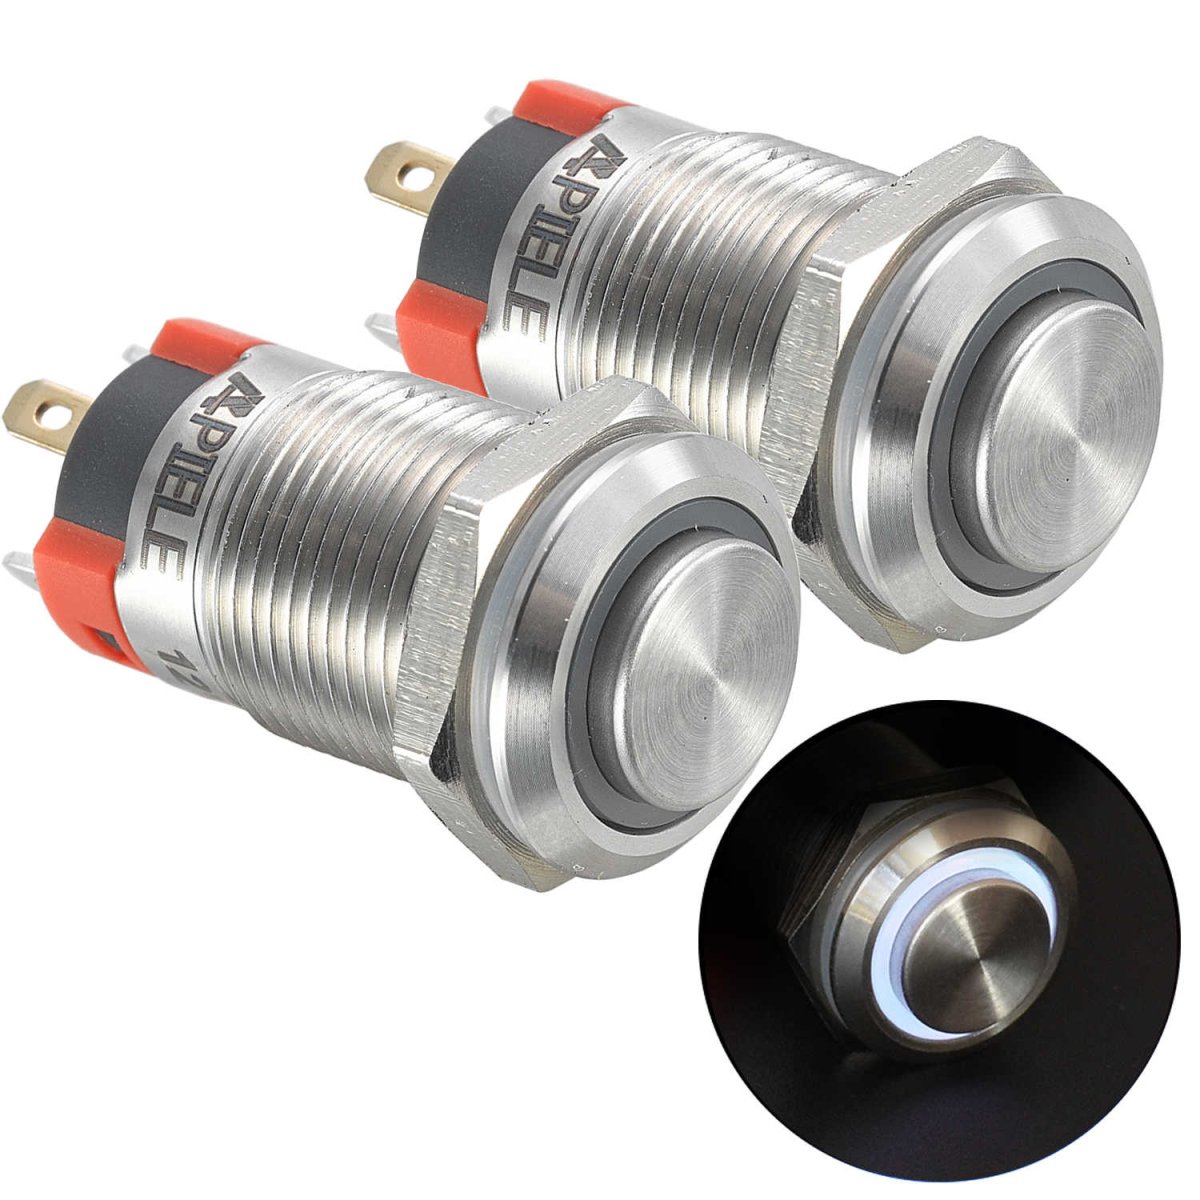 12mm Latching/Momentary Push Button Switch High Head Stainless Steel with Ring Led IP65 Waterproof (Pcs of 2) Customizable - White-Latching